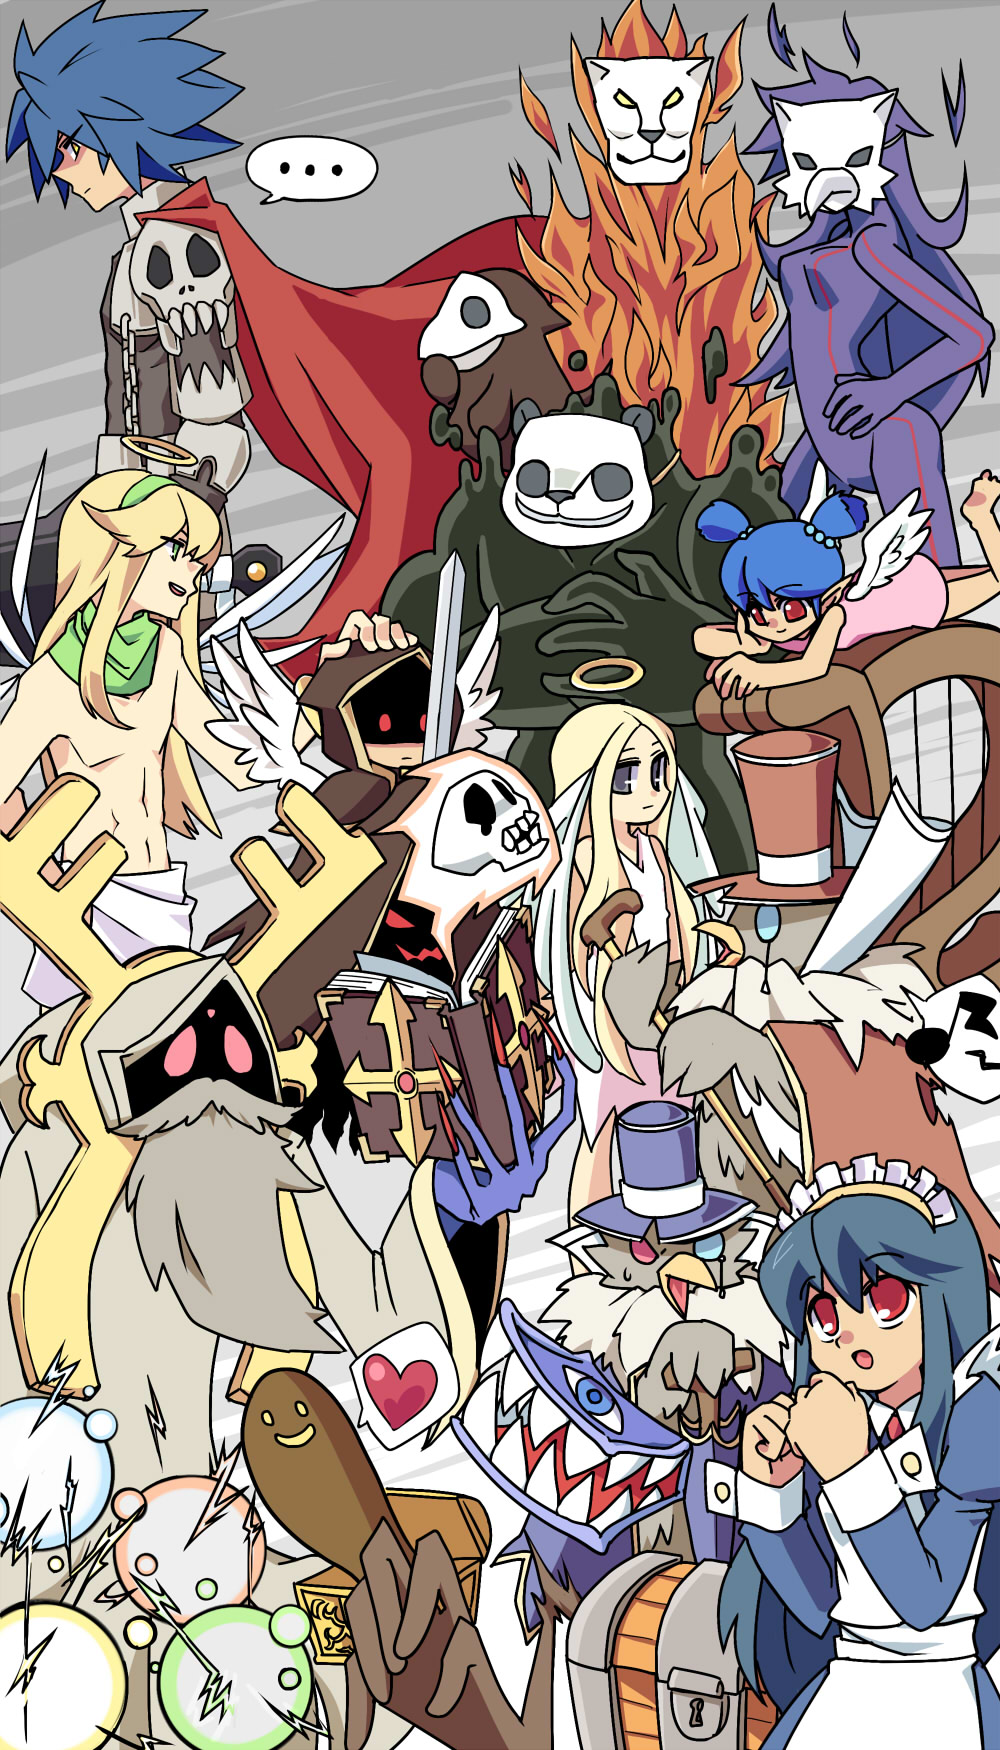 ... 4girls 5boys alice_(ragnarok_online) ancient_mimic angel angel_wings bangs baroness_of_retribution beard bird blonde_hair blue_cape blue_hair book brown_hood cane cape chain closed_mouth commentary_request cowboy_shot dame_of_sentinel darkness death_word demon despero_of_thanatos dolor_of_thanatos dress elder_(ragnarok_online) energy eyebrows_visible_through_hair facial_hair fox_mask genderswap genderswap_(ftm) green_eyes green_hairband green_scarf hairband halo harp hat heart highres holding holding_book holding_sword holding_weapon instrument lady_solace long_hair looking_to_the_side maero_of_thanatos maid maid_headdress mask mimic mimic_(ragnarok_online) mimic_chest mistress_of_shelter monocle monster multiple_boys multiple_girls odium_of_thanatos open_mouth owl owl_baron owl_duke owl_mask panda_mask plasma_(ragnarok_online) purple_eyes ragnarok_online red_cape red_eyes red_headwear rei_ai rideword_(ragnarok_online) scarf short_hair short_twintails skull smile spiked_hair spoken_ellipsis spoken_heart sword teeth thanatos_(ragnarok_online) top_hat topless_male treasure_chest twintails weapon white_dress white_wings wings